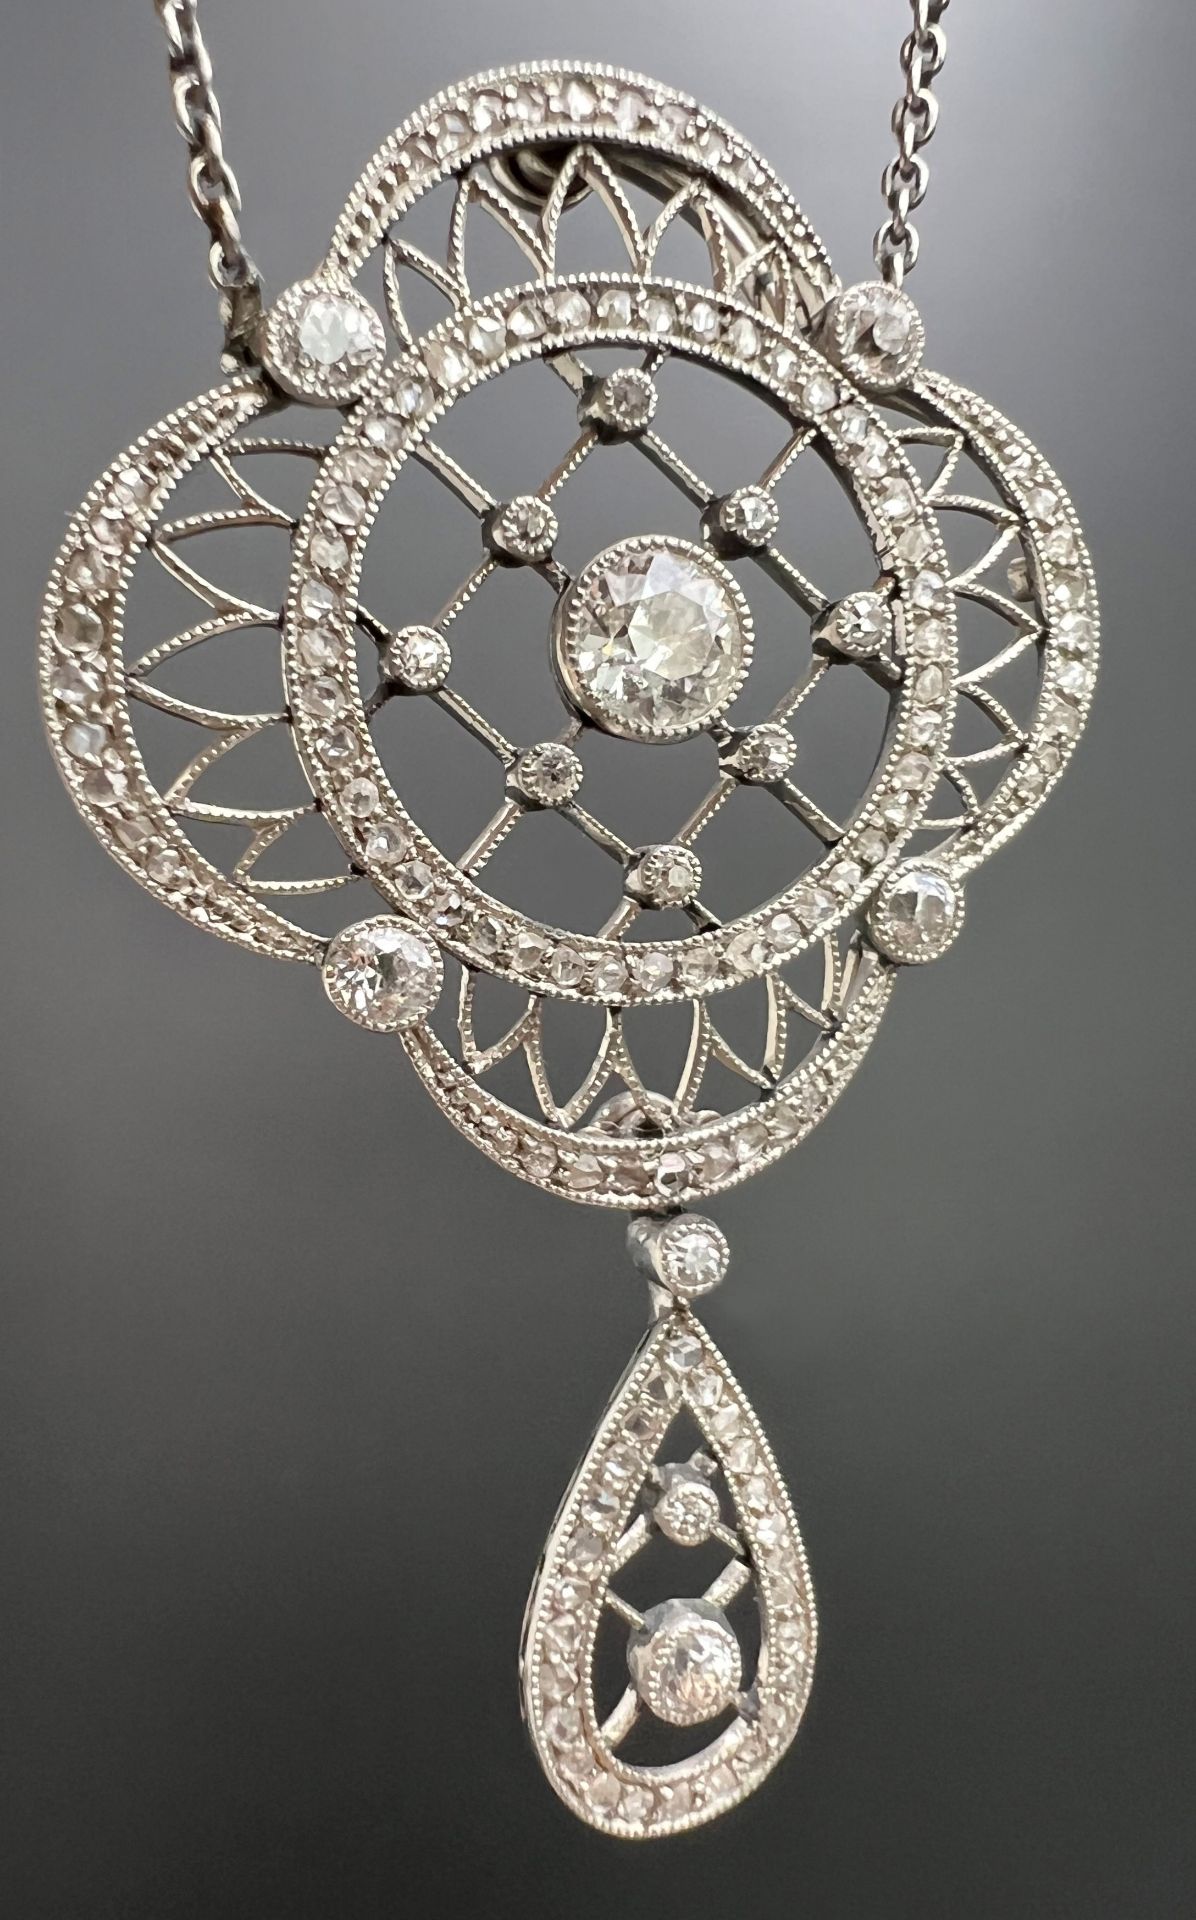 Pendant with chain 750 white gold. Art deco. - Image 3 of 14